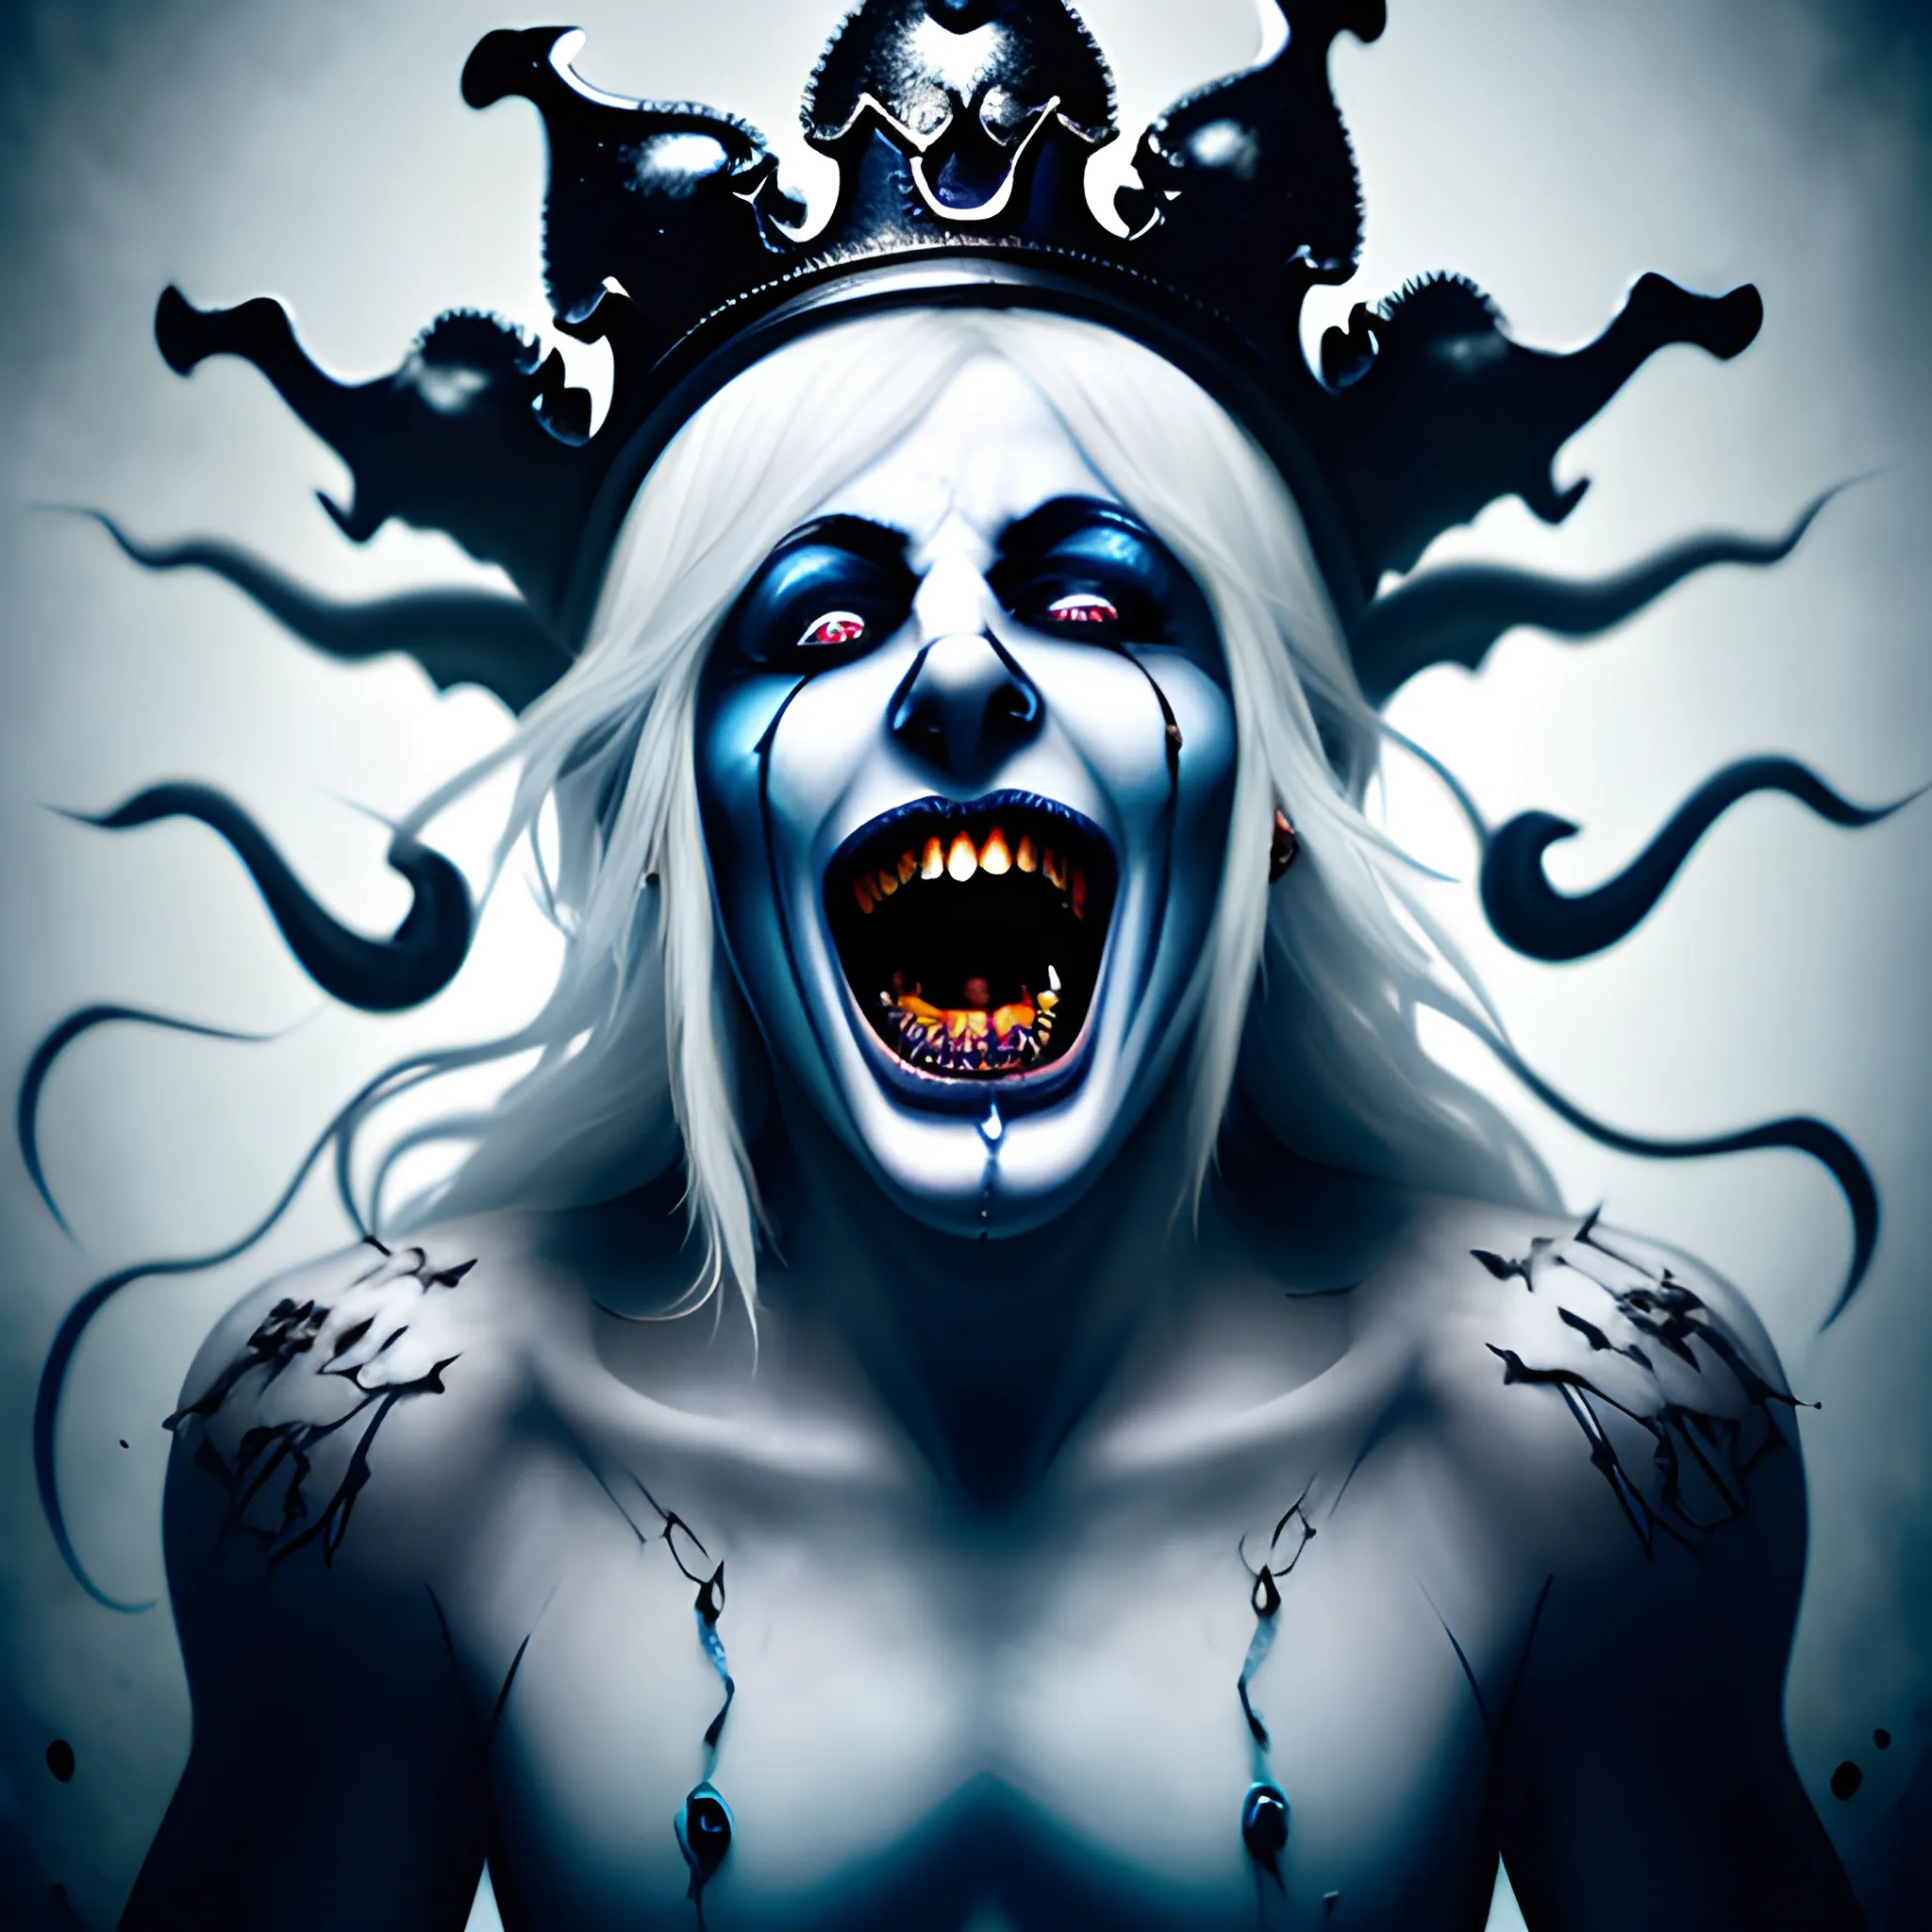 photorealistic image of the king of ghosts screaming with a black crown, full body, ominous smile, dimmed lighting, blue painted hair, white makeup, evil grin, bokeh lighting